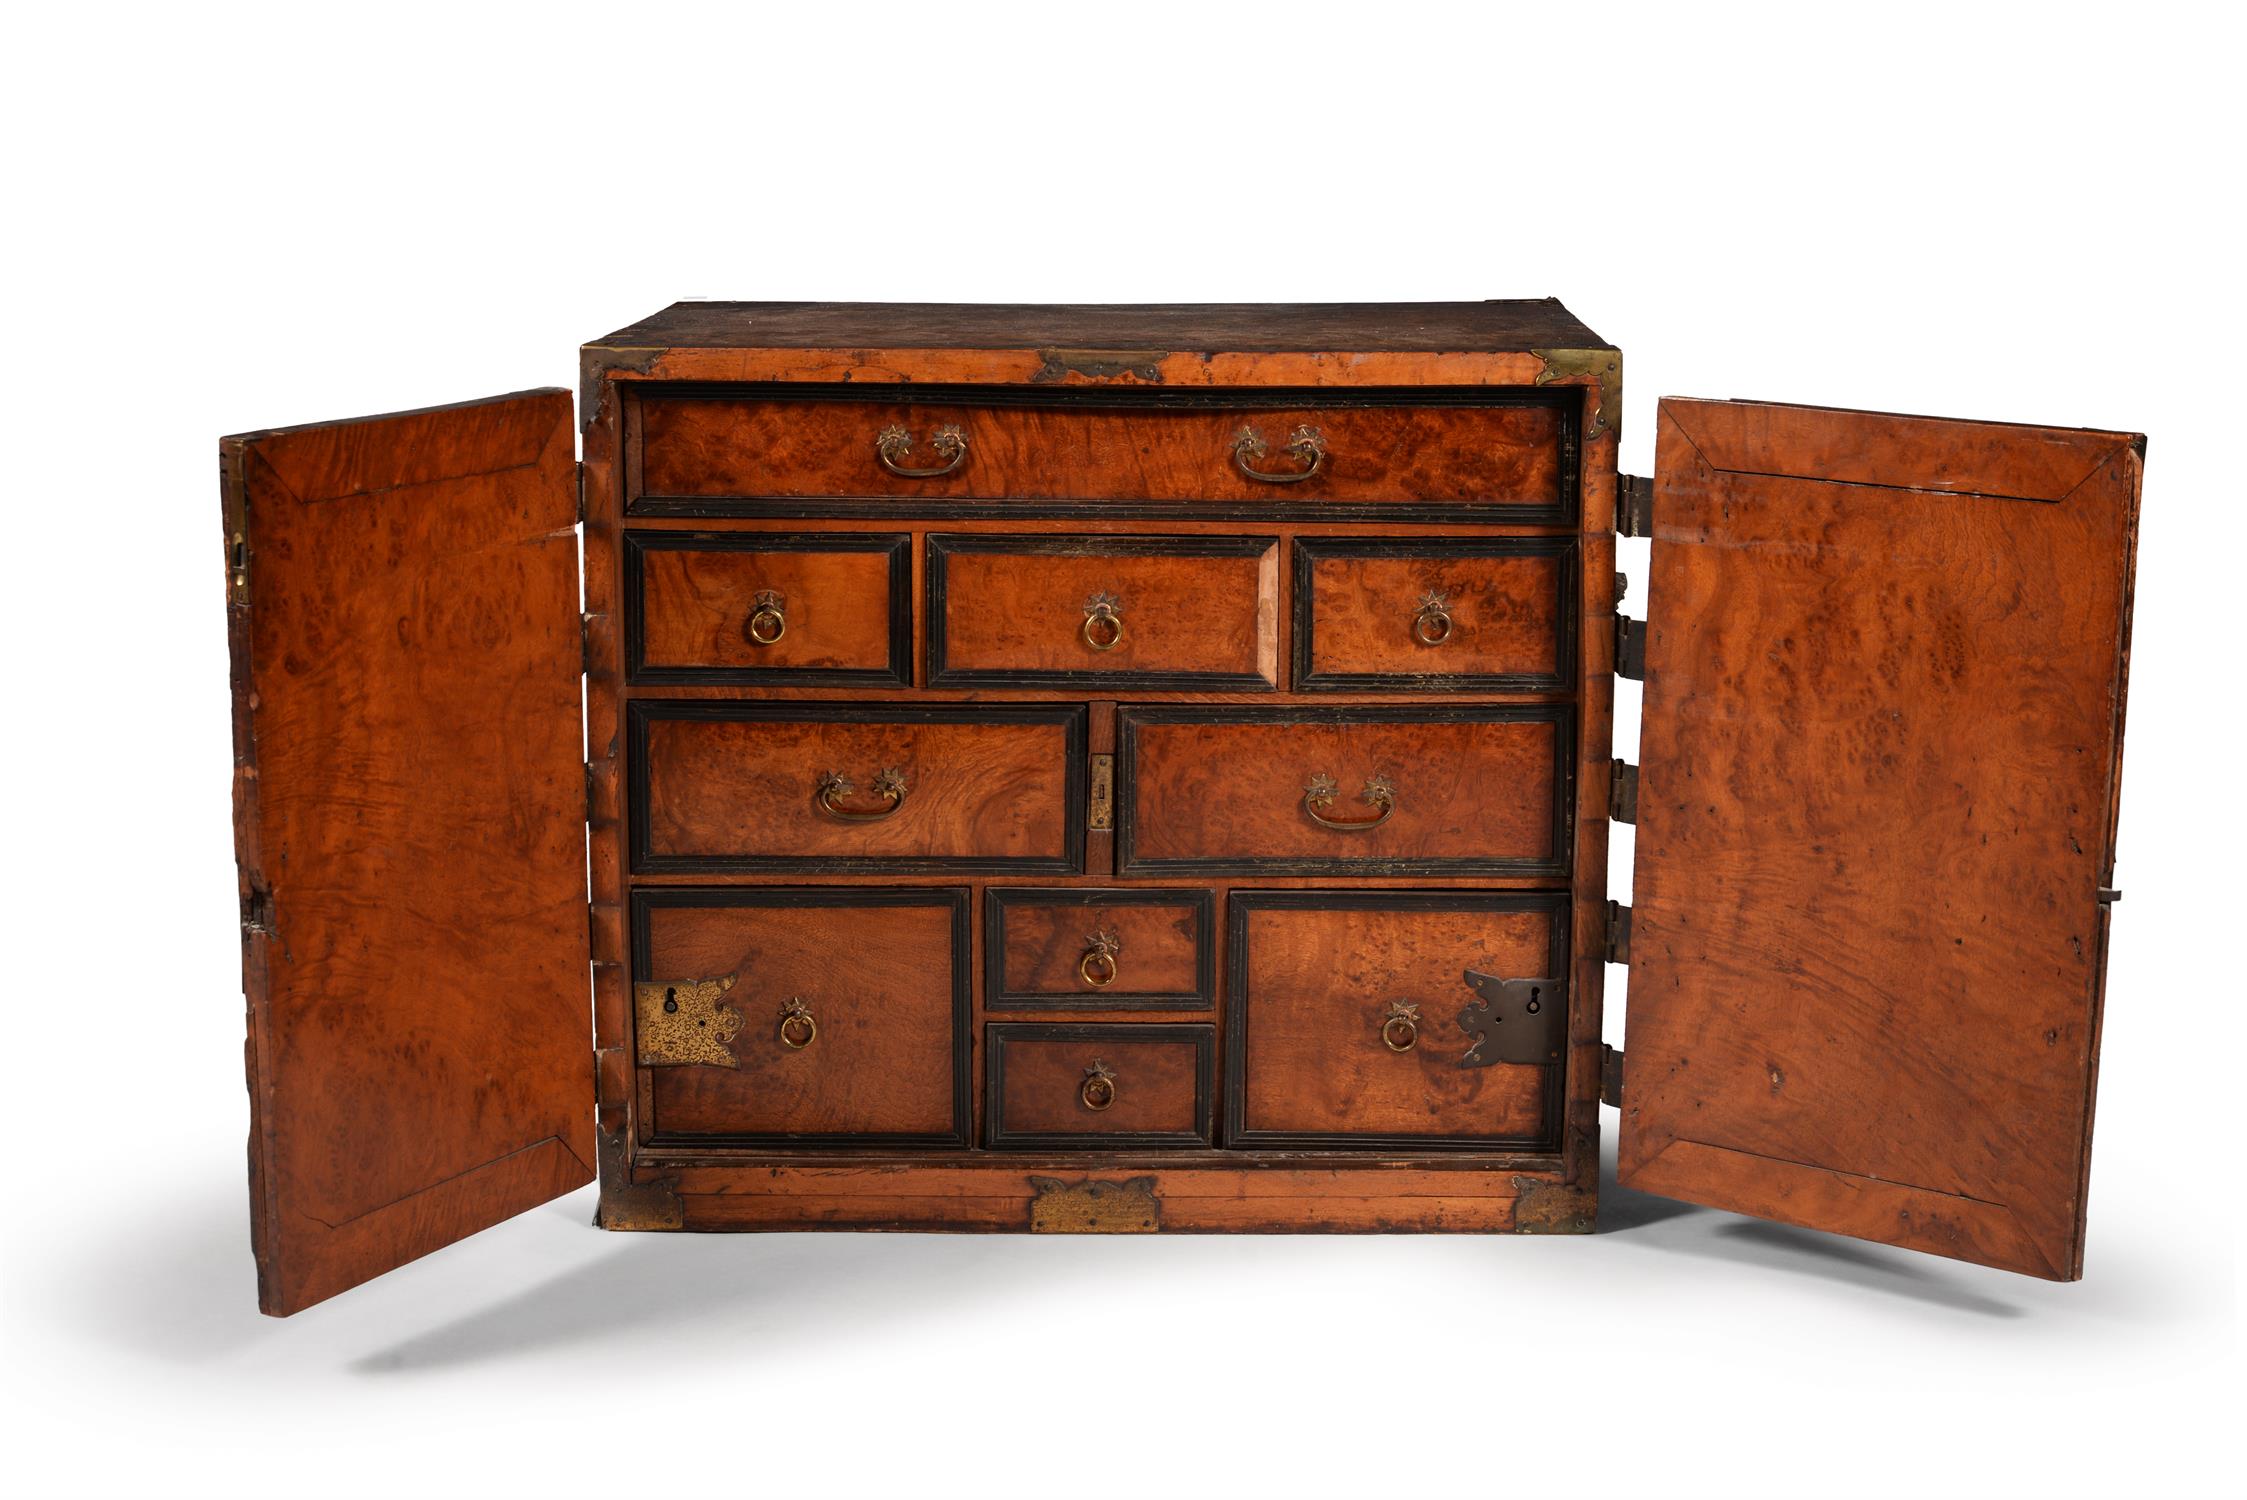 A Dutch Colonial exotic hardwood and brass mounted cabinet - Image 4 of 8